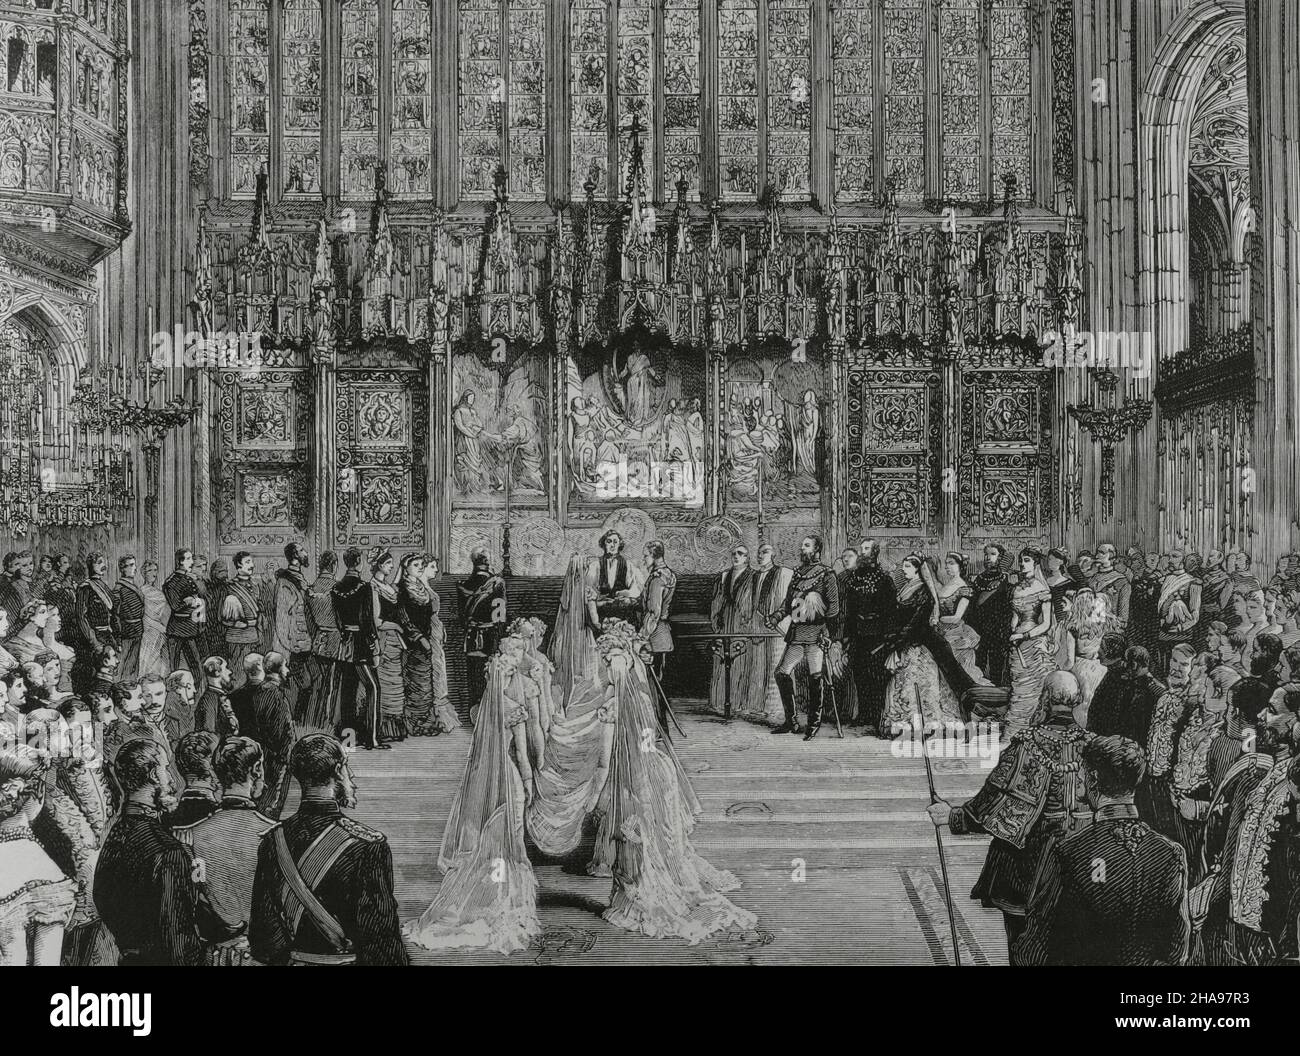 Marriage of the Duke of Albany (27th April 1882). Leopold, Duke of Albany (1853-1884), the eighth child of Queen Victoria and Prince Albert. He married Princess Helena of Waldeck and Pyrmont (1861-1922) in St George’s Chapel at Windsor Castle (England). Wedding Blessing Ceremony. Engraving by Capuz. La Ilustración Española y Americana, 1882. Stock Photo